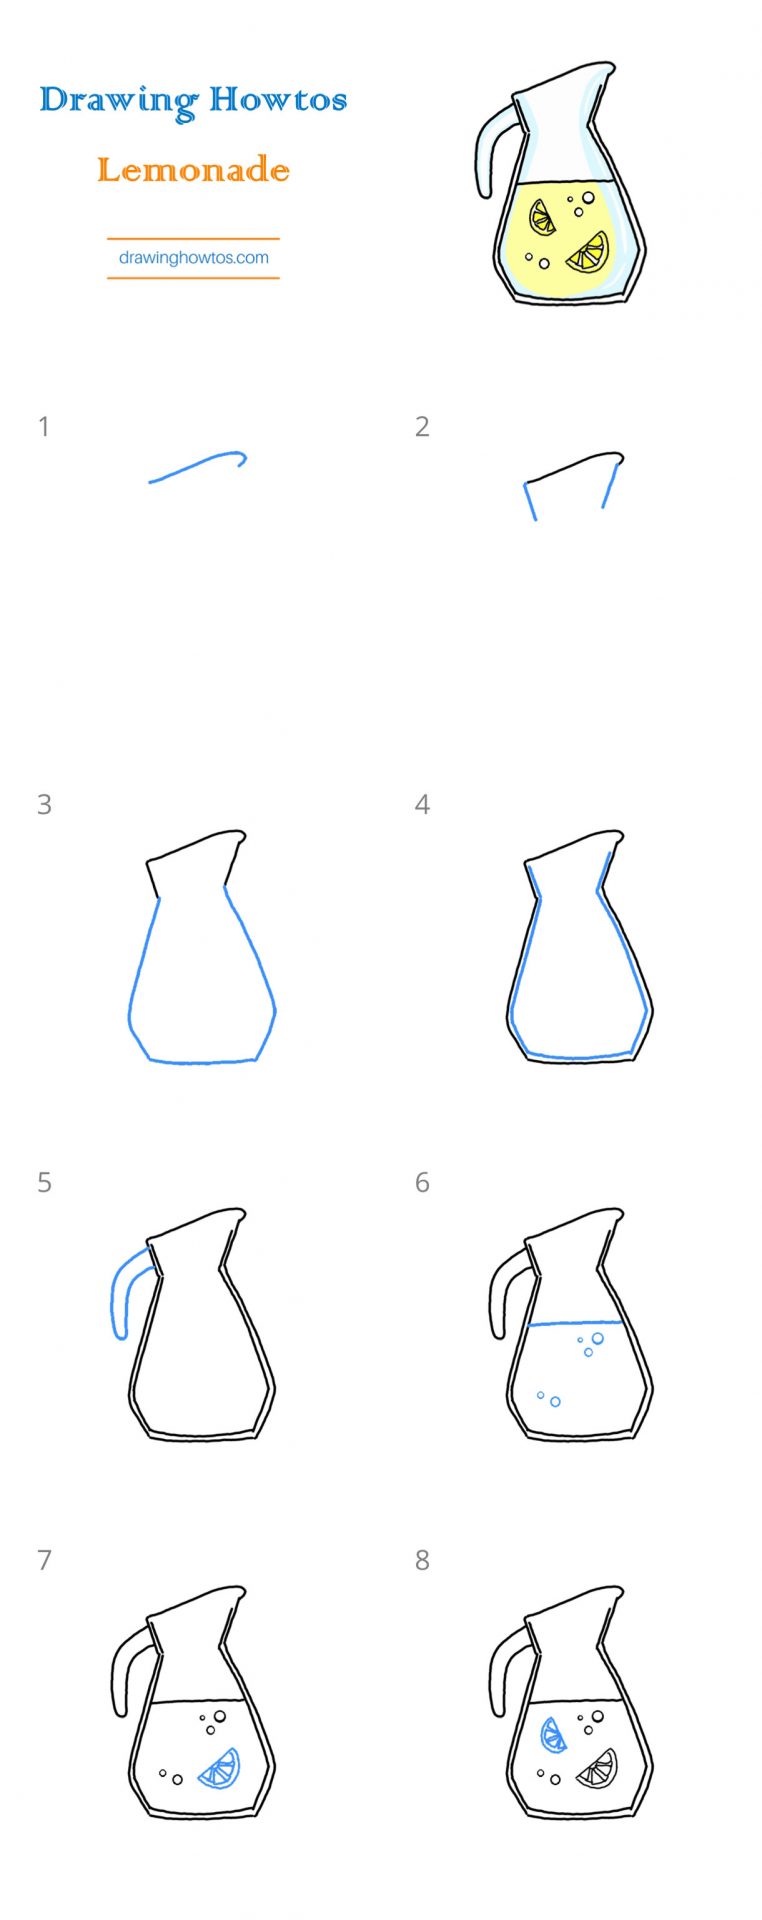 How to Draw Lemonade Step by Step